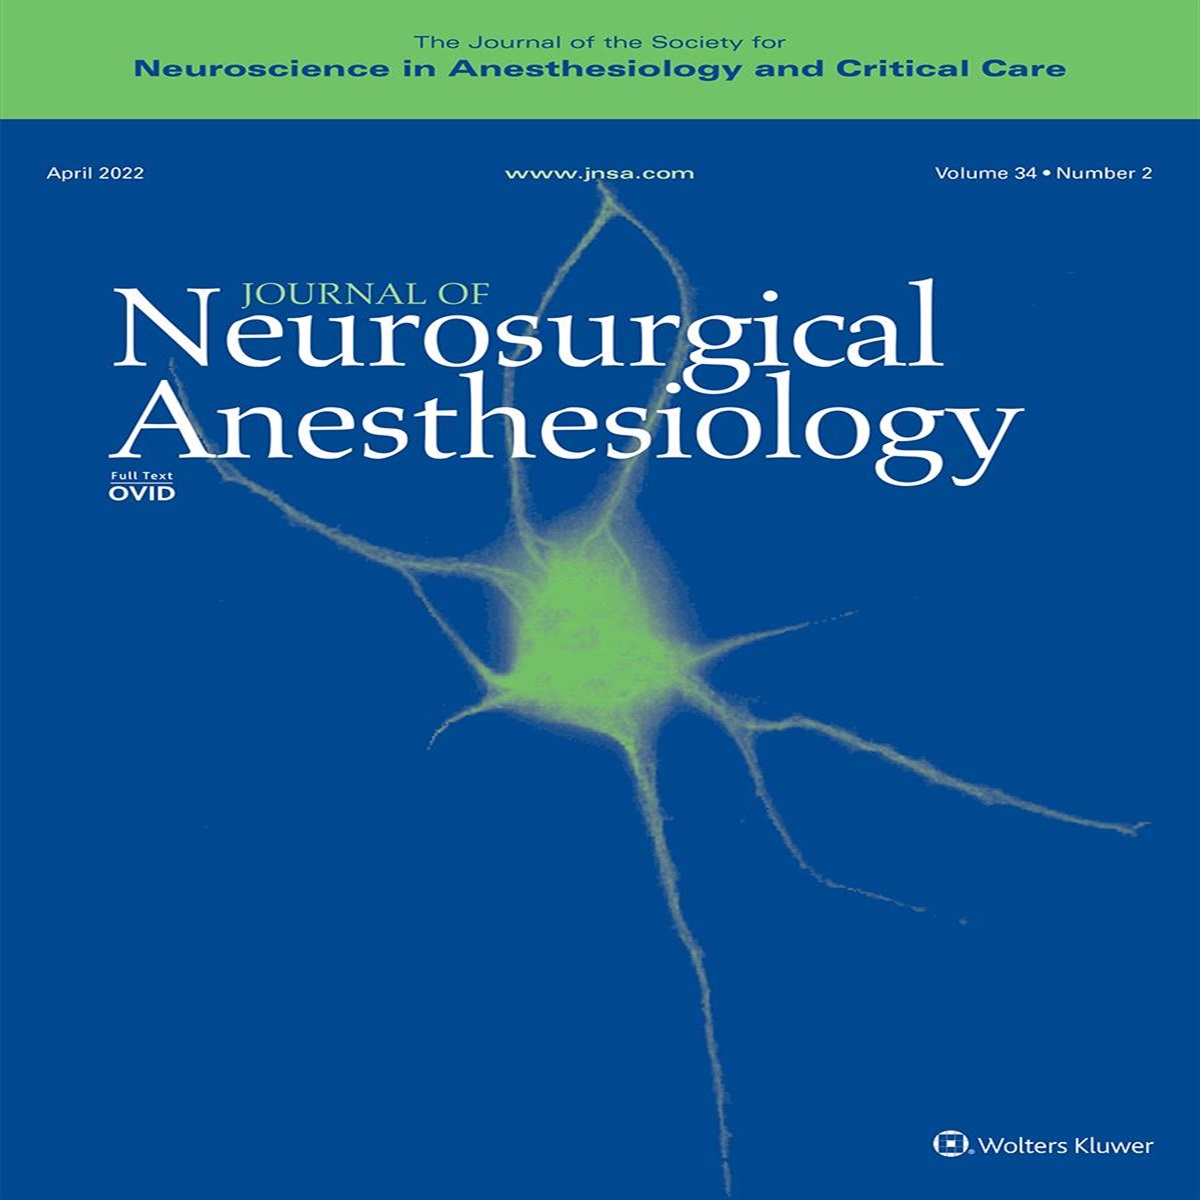 Journal of Neurosurgical Anesthesiology 2021 Reviewer Acknowledgement